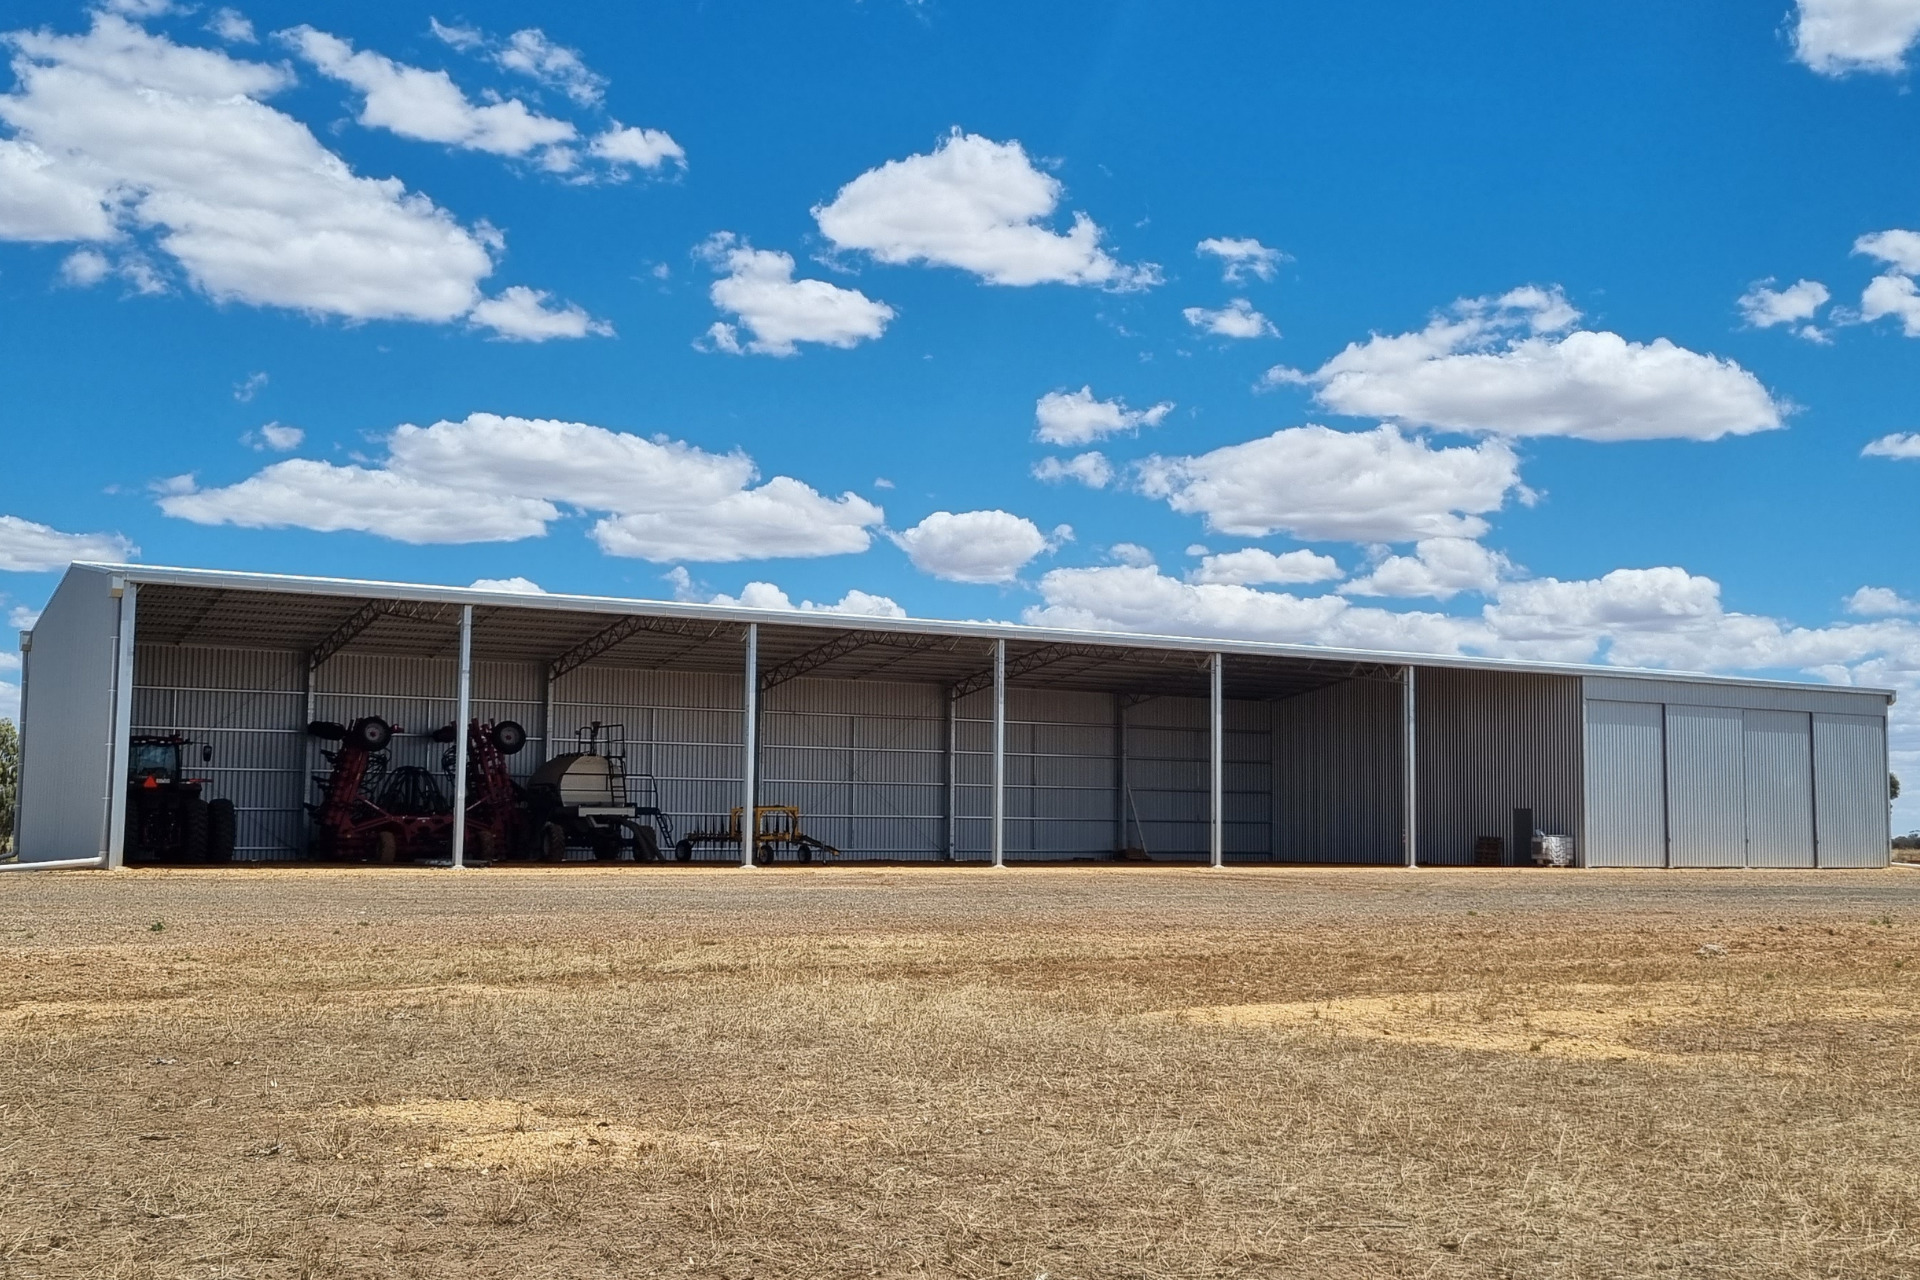 A 64m x 18m machinery shed with enclosed bay